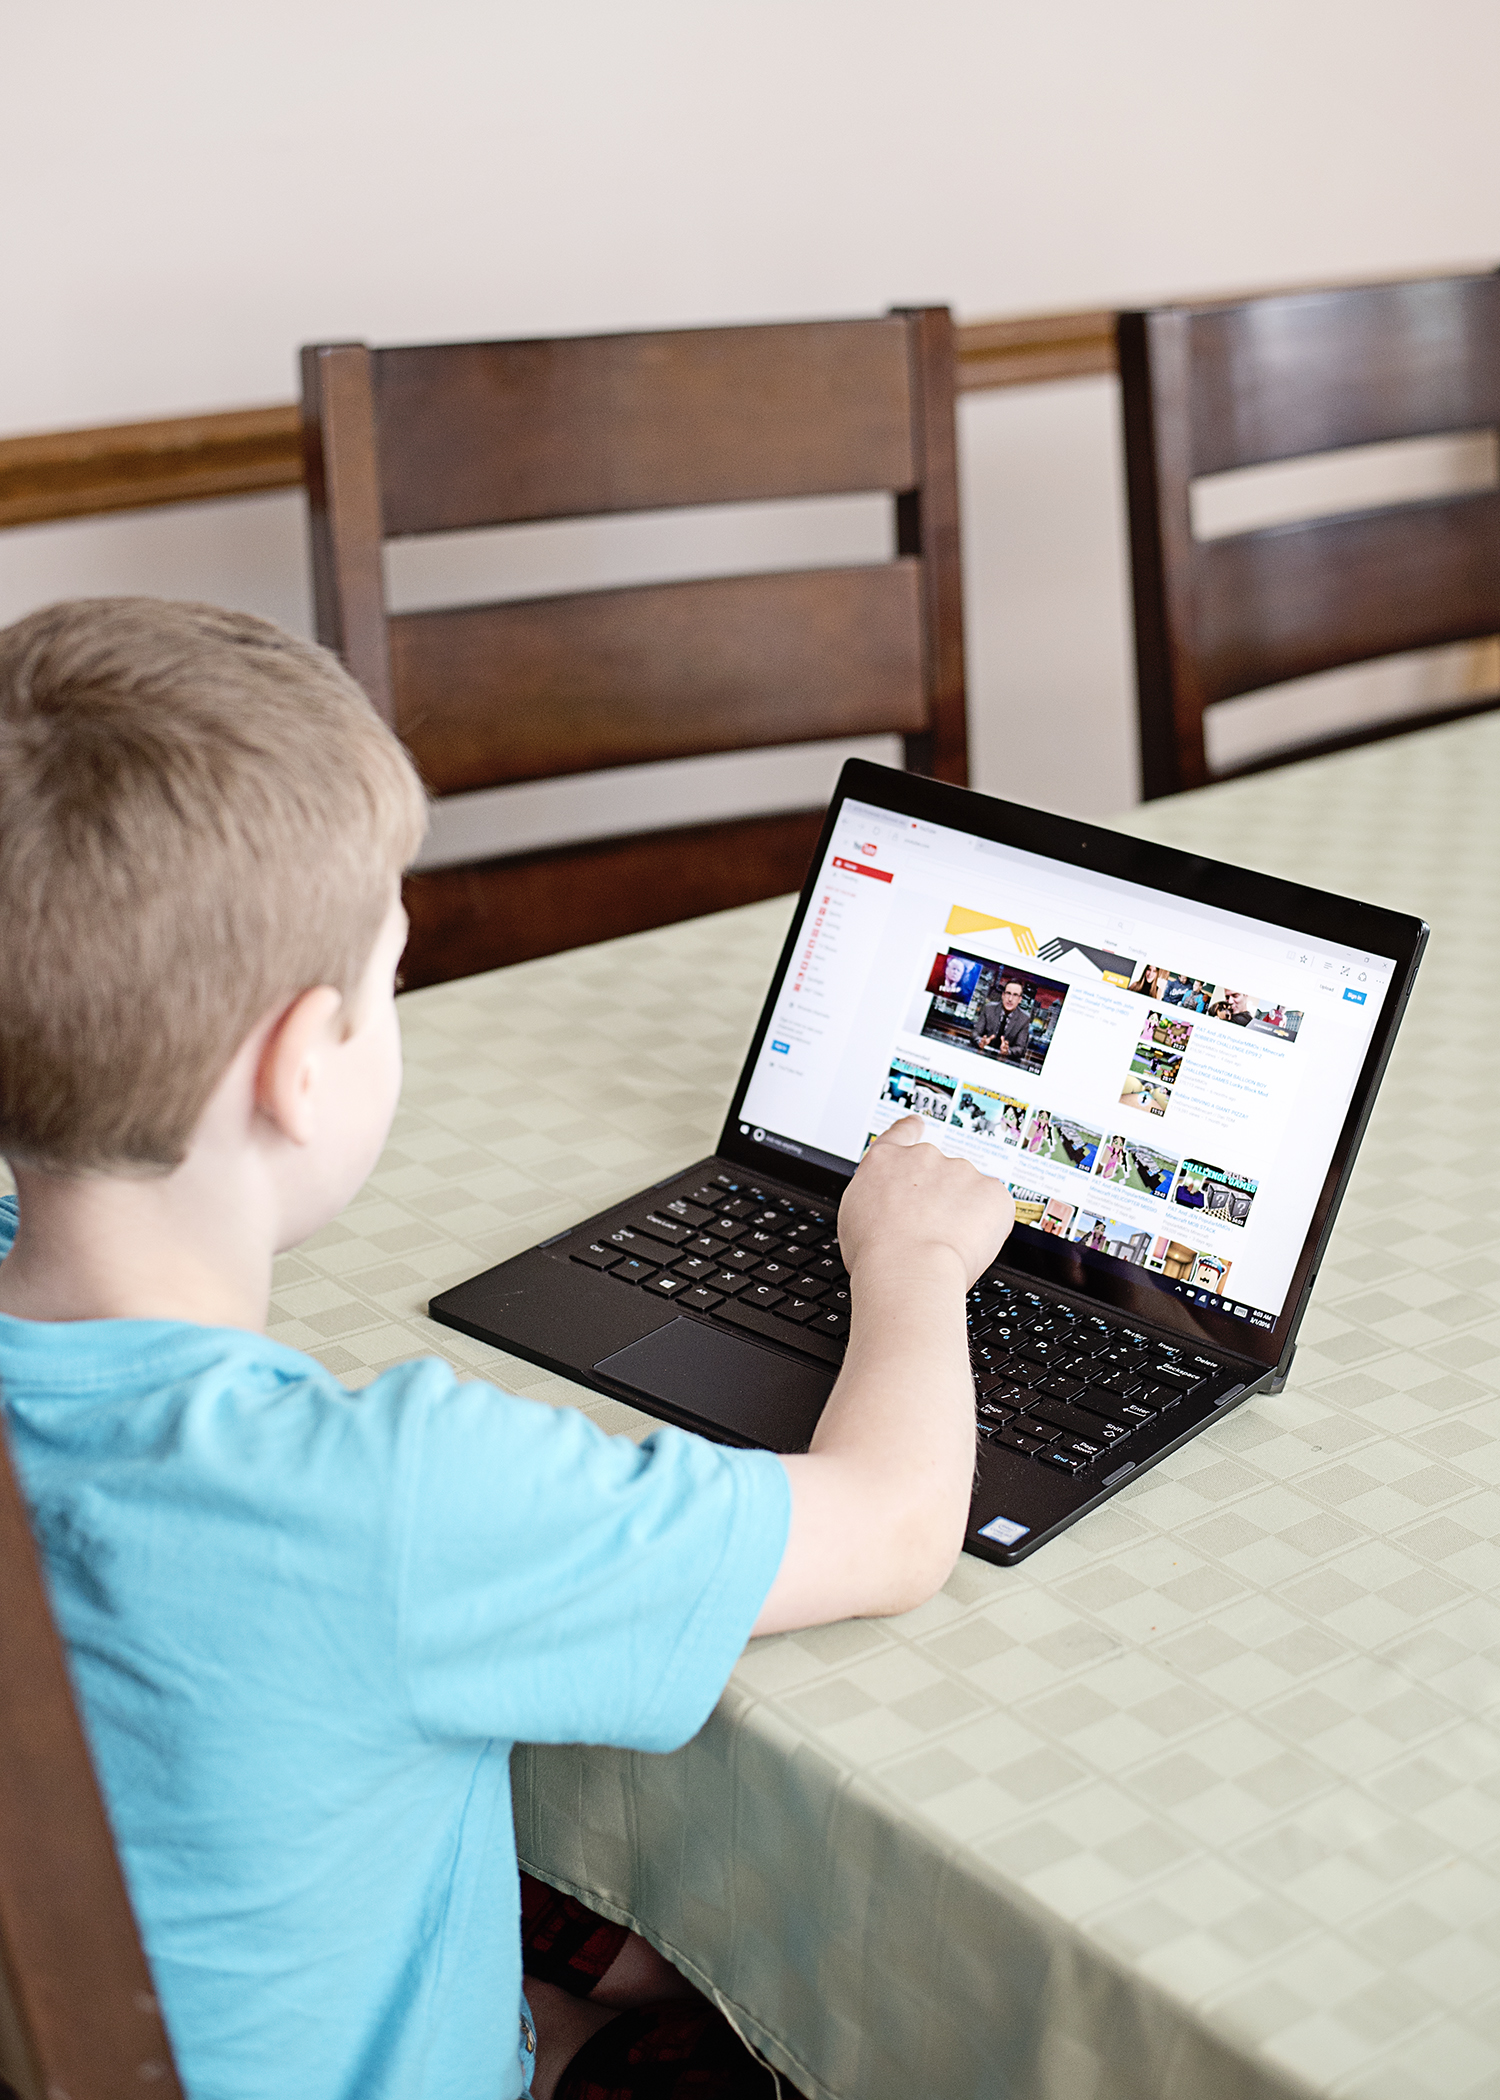 Mom-treprenuer Made Easy with the Dell XPS 12!